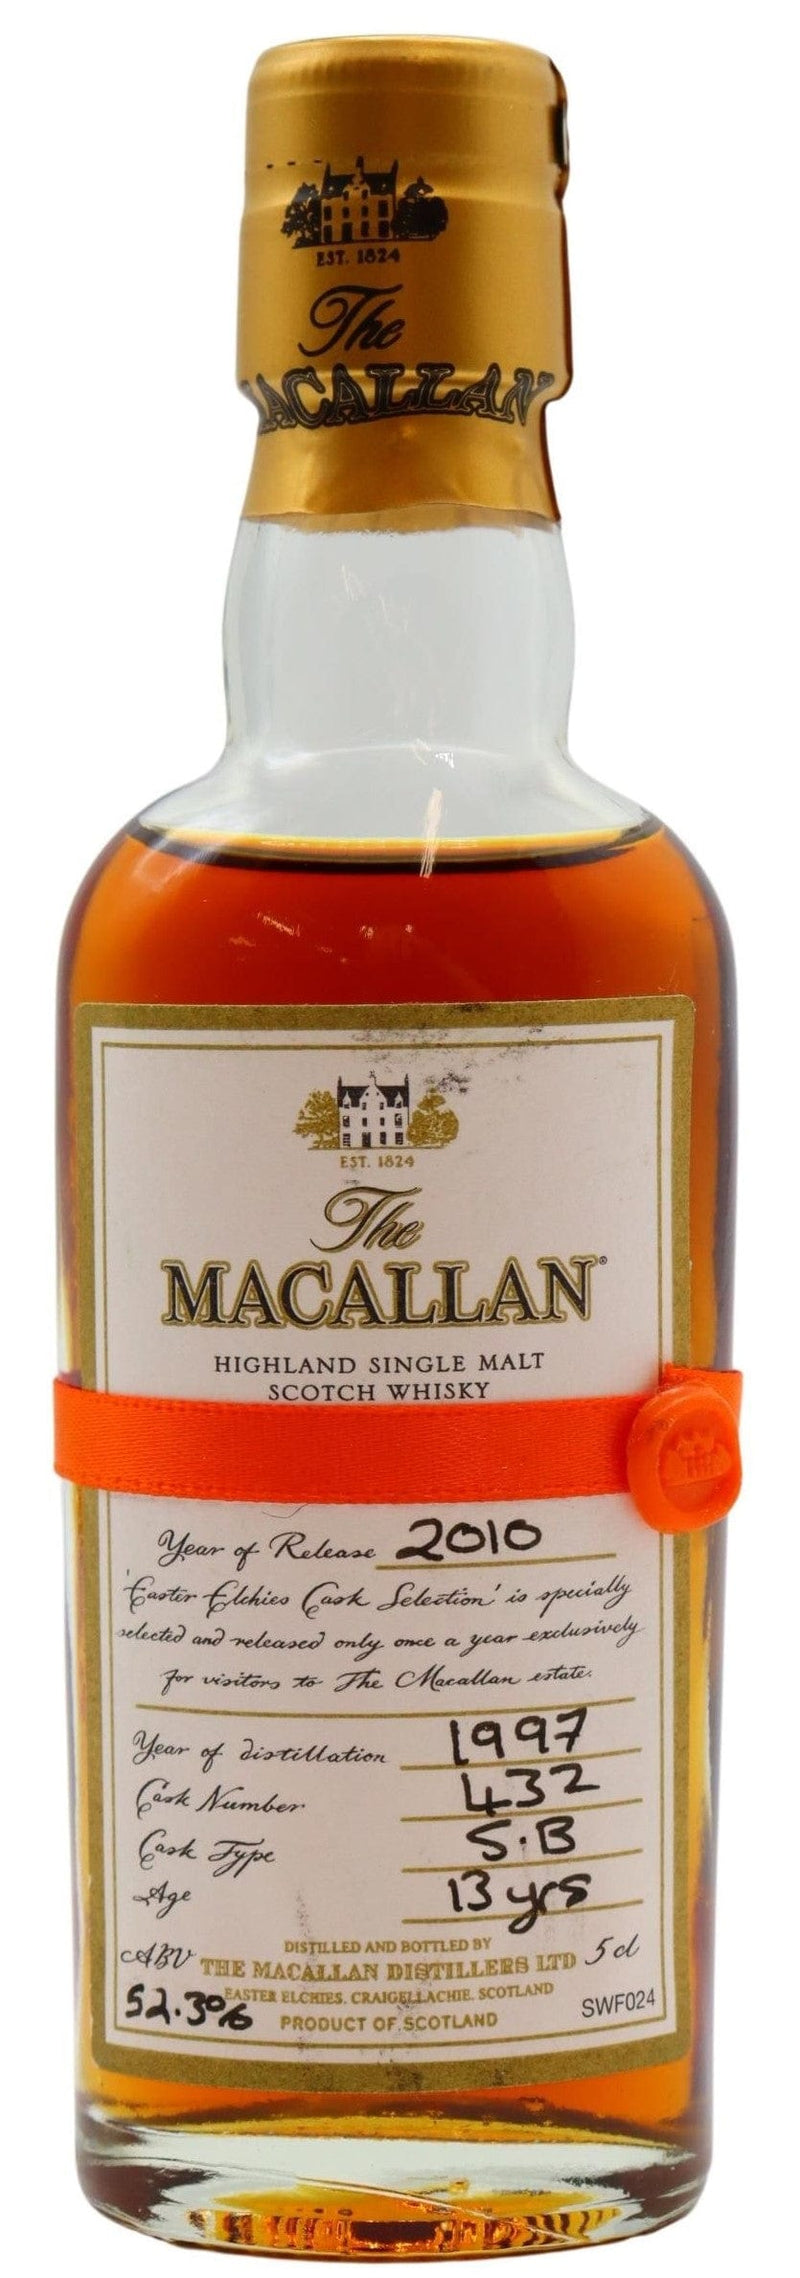 Macallan Easter Elchies 1997 - 13 Year Old Whisky Bottled 2010 Miniature 5cl